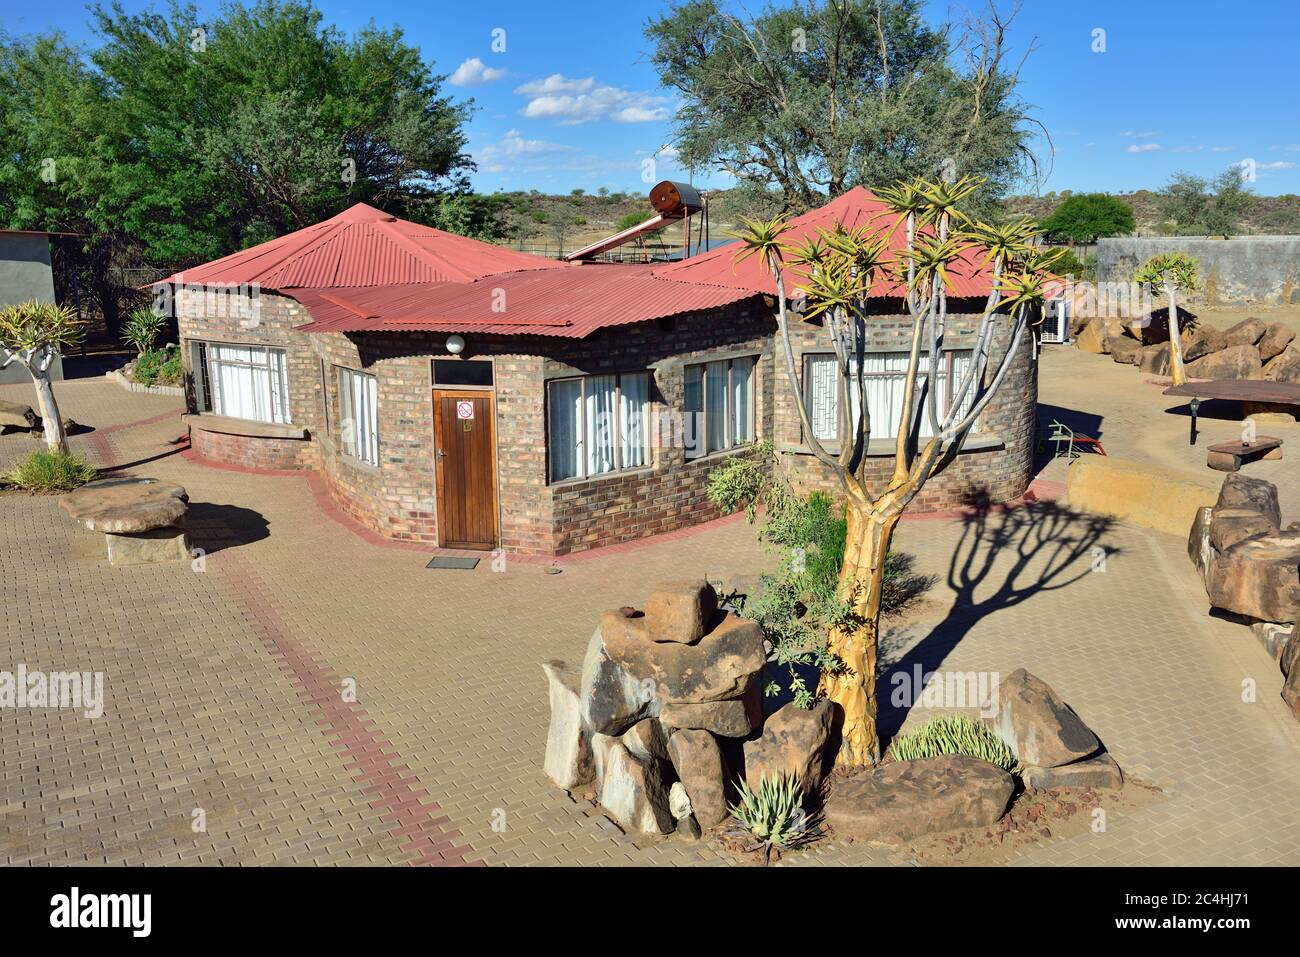 KEETMANSHOOP, NAMIBIA - JAN 25, 2016: Accommodation units in Quivertree Forest Rest Camp,  where visitors can explore the ancient and famous Quivertre Stock Photo